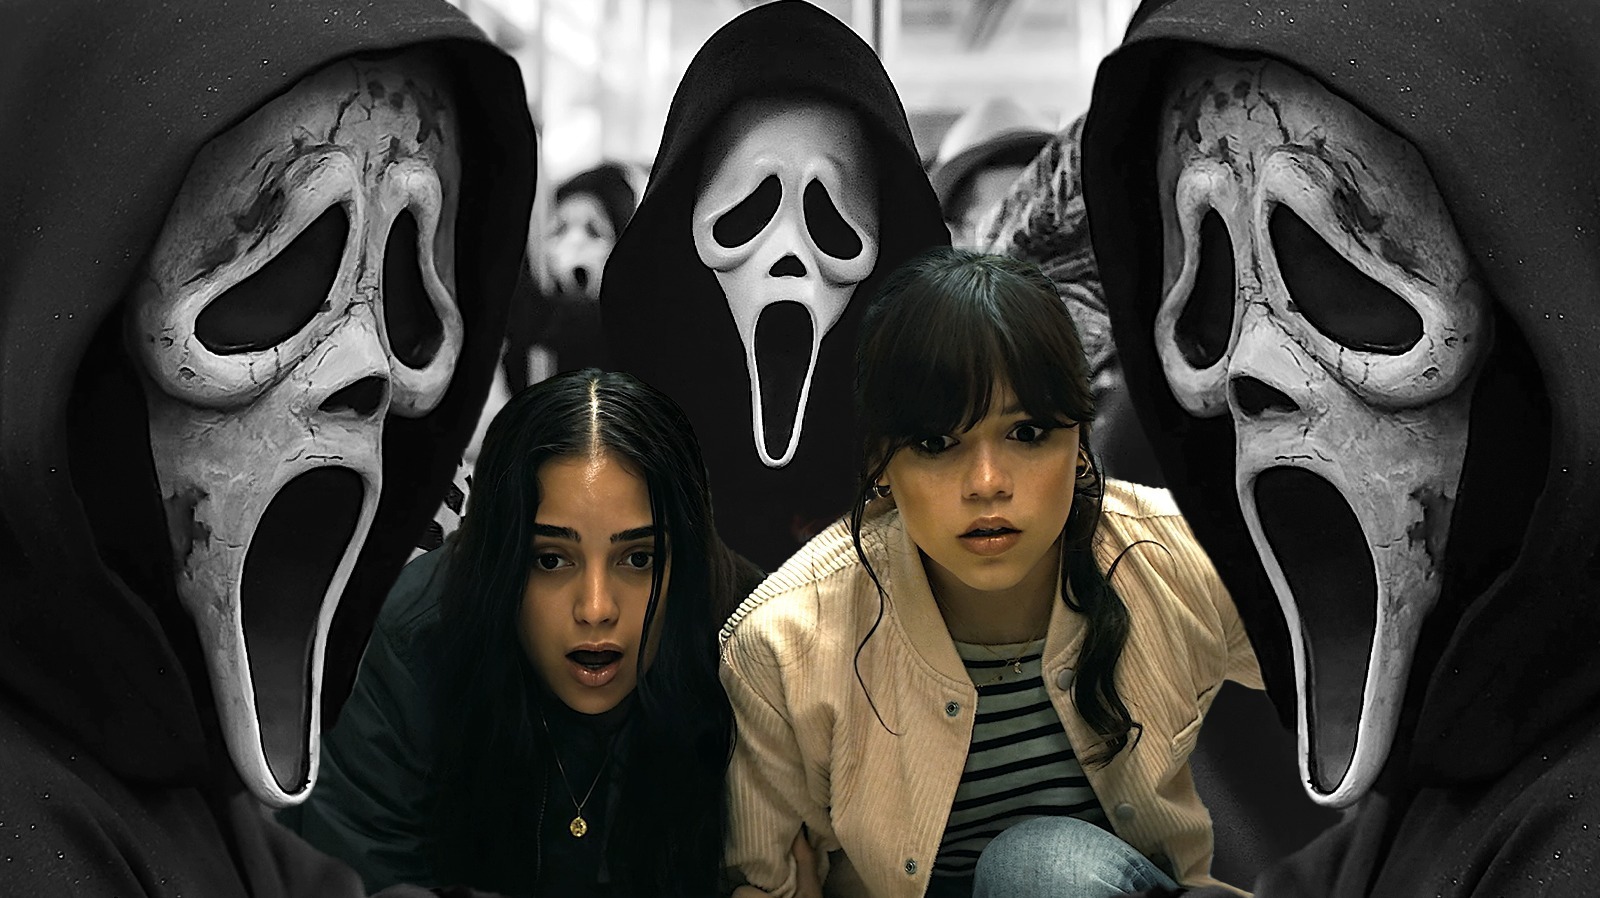 Scream 6' spoilers! Why this character is franchise's best killer